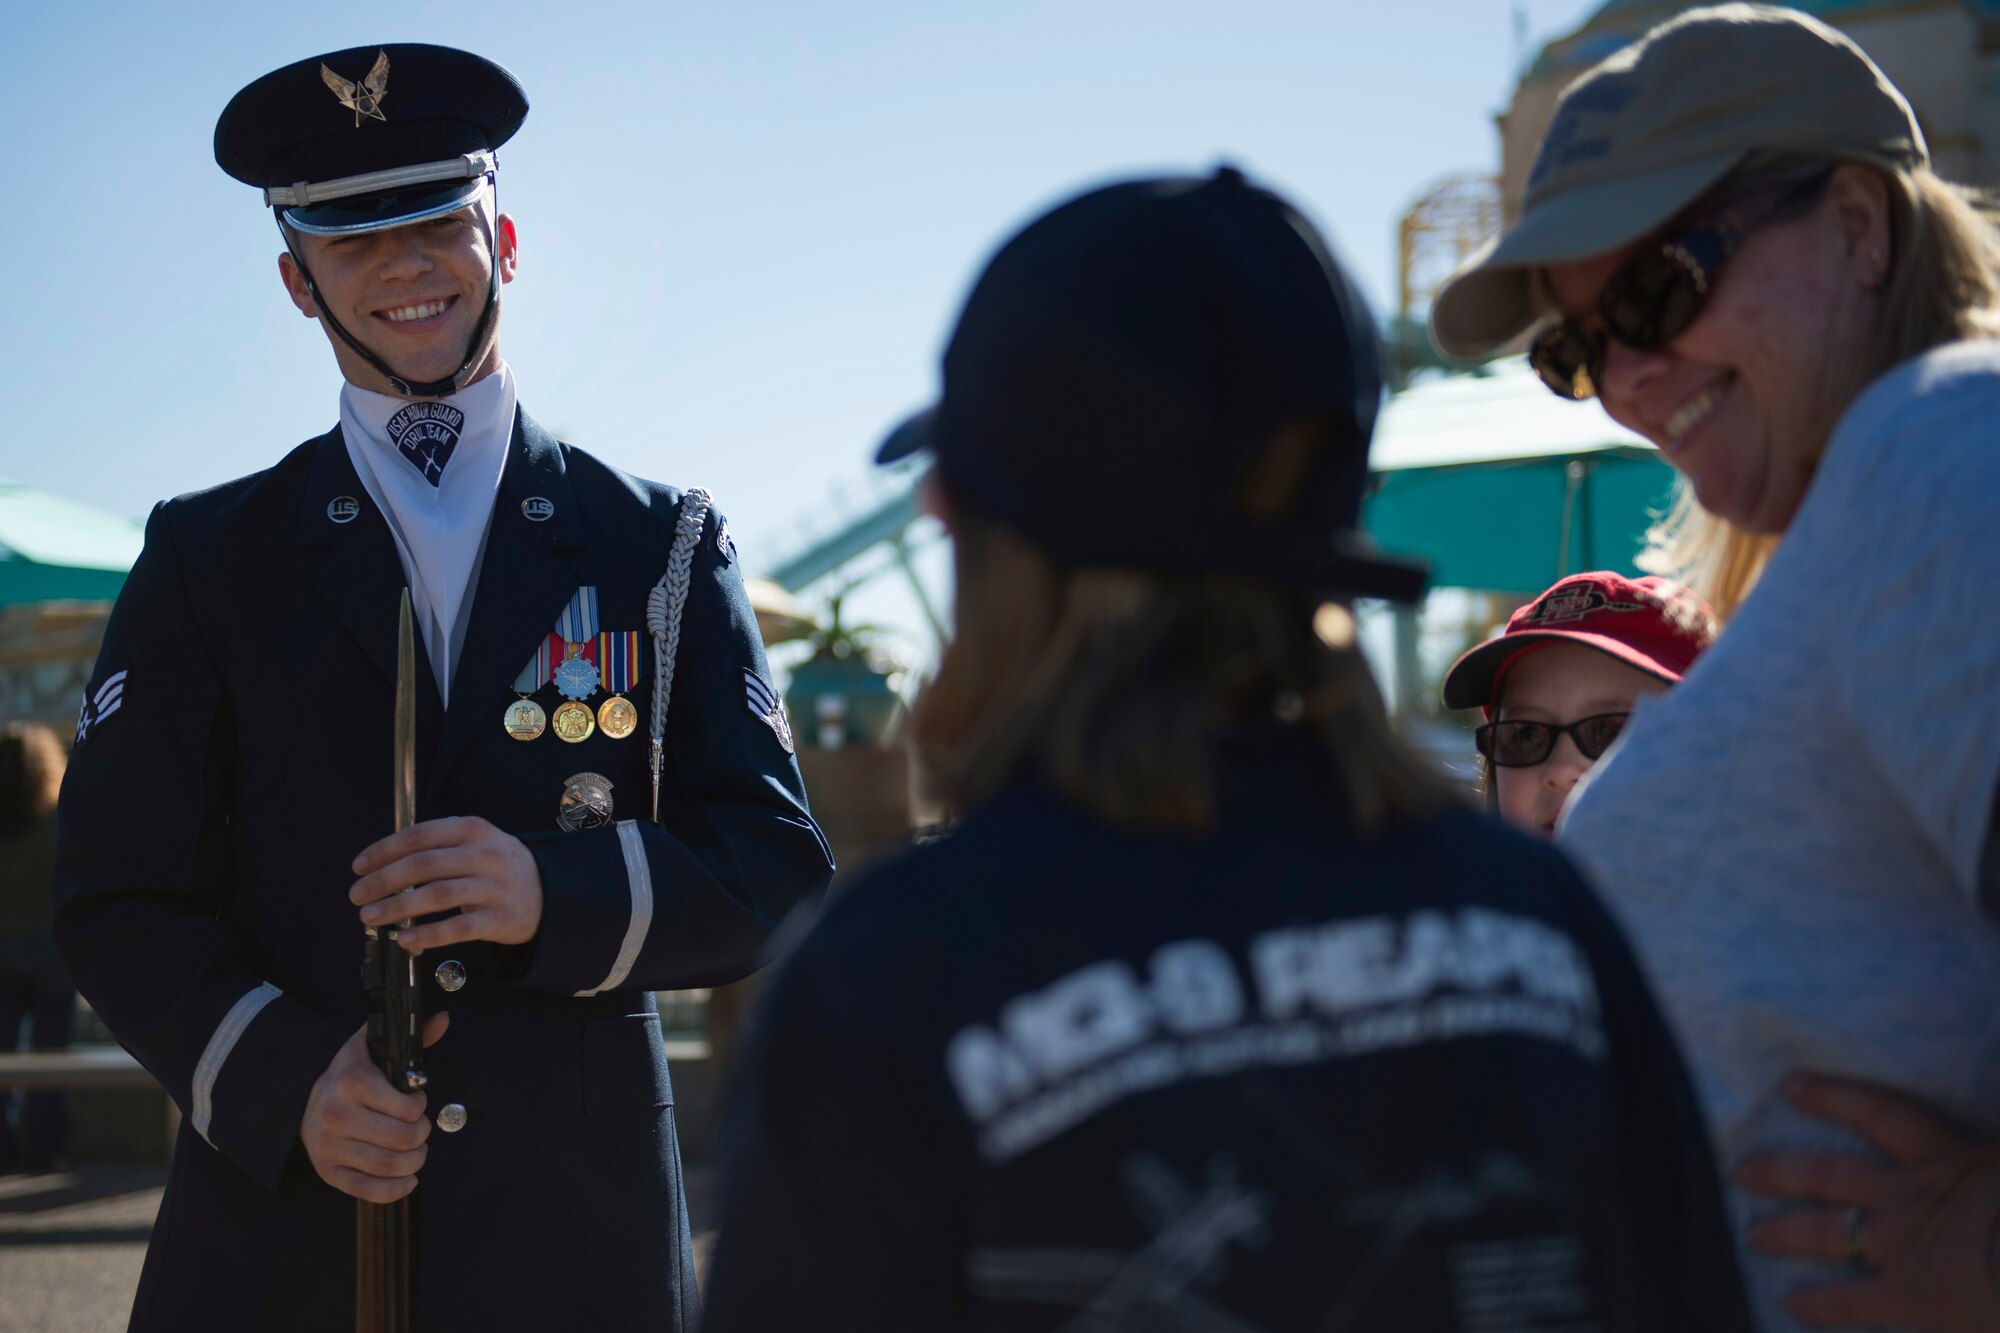 Senior Airman Jacob Wilson, U.S. Air Force Honor Guard Drill Team member, speaks with a young girl about the Air Force after a performance at Sea World in San Diego, Calif., Dec. 29, 2016. The drill team showcases their drill performances at public venues, such as Sea World, to recruit and inspire the public. (U.S. Air Force photo by Senior Airman Philip Bryant)